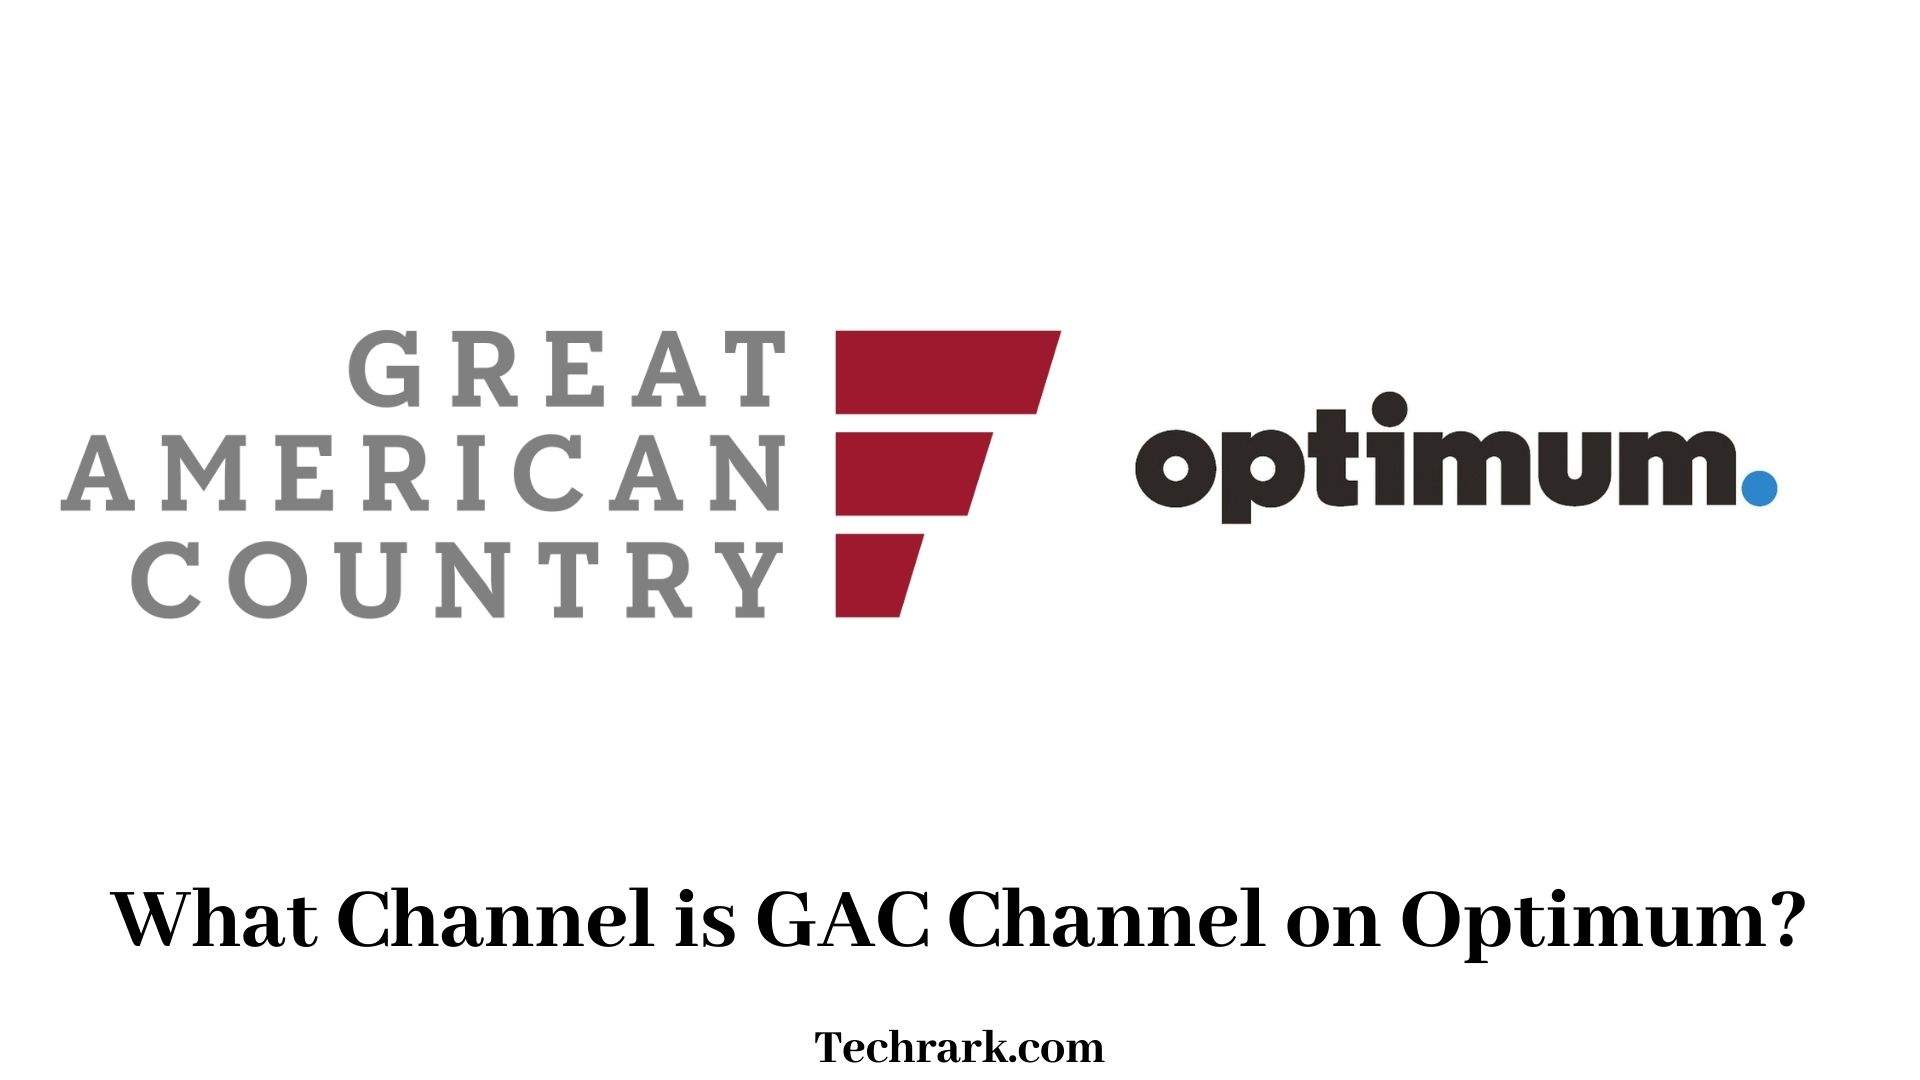 What Channel is GAC on Optimum